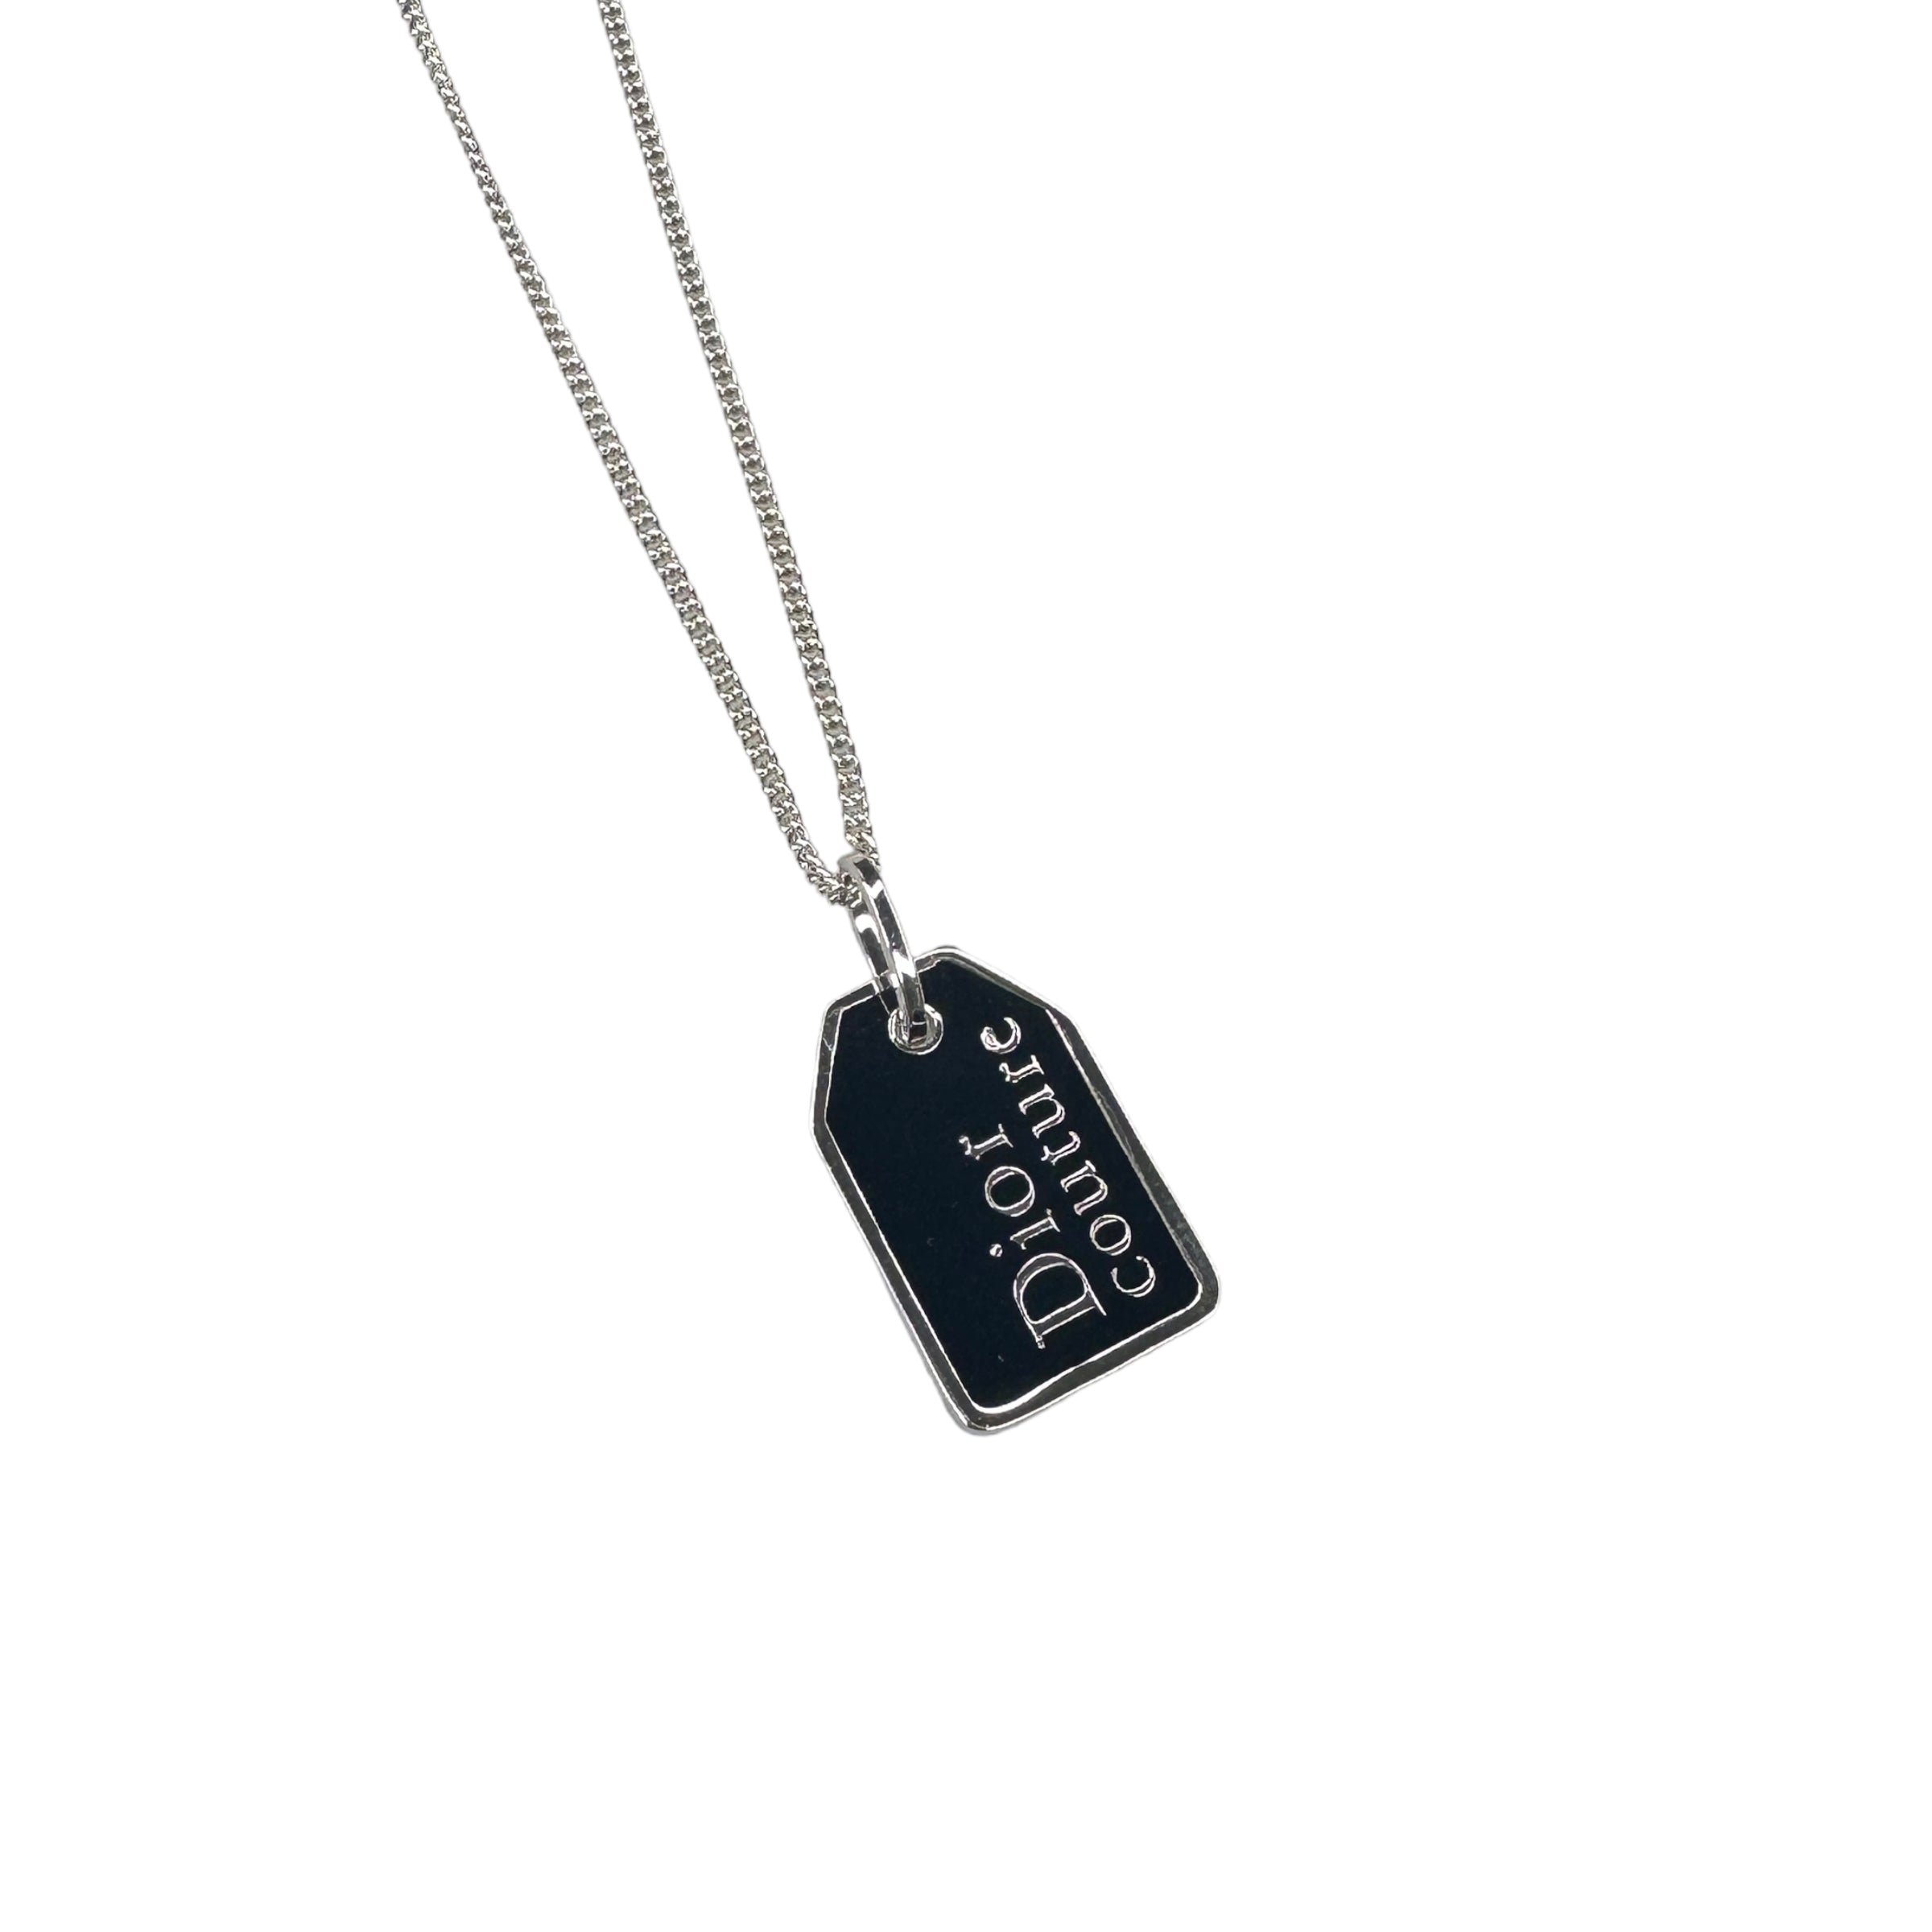 DIOR COUTURE PENDANT NECKLACE - SILVER PLATED